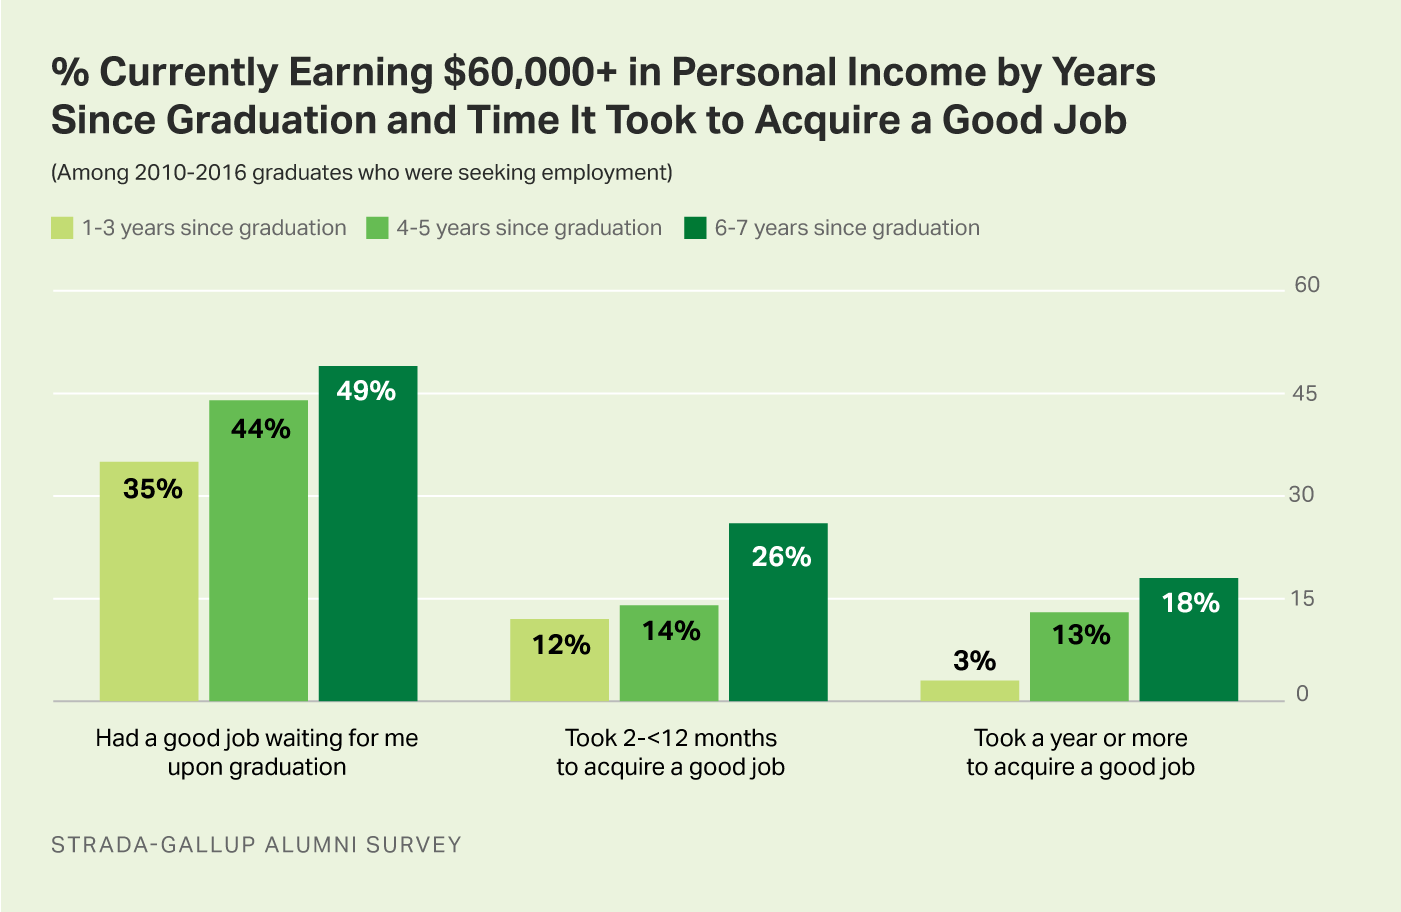 Bar graph. Higher percentages of college graduates who had a job waiting for them at graduation earn $60,000+ per year than those who did not have a good job waiting.